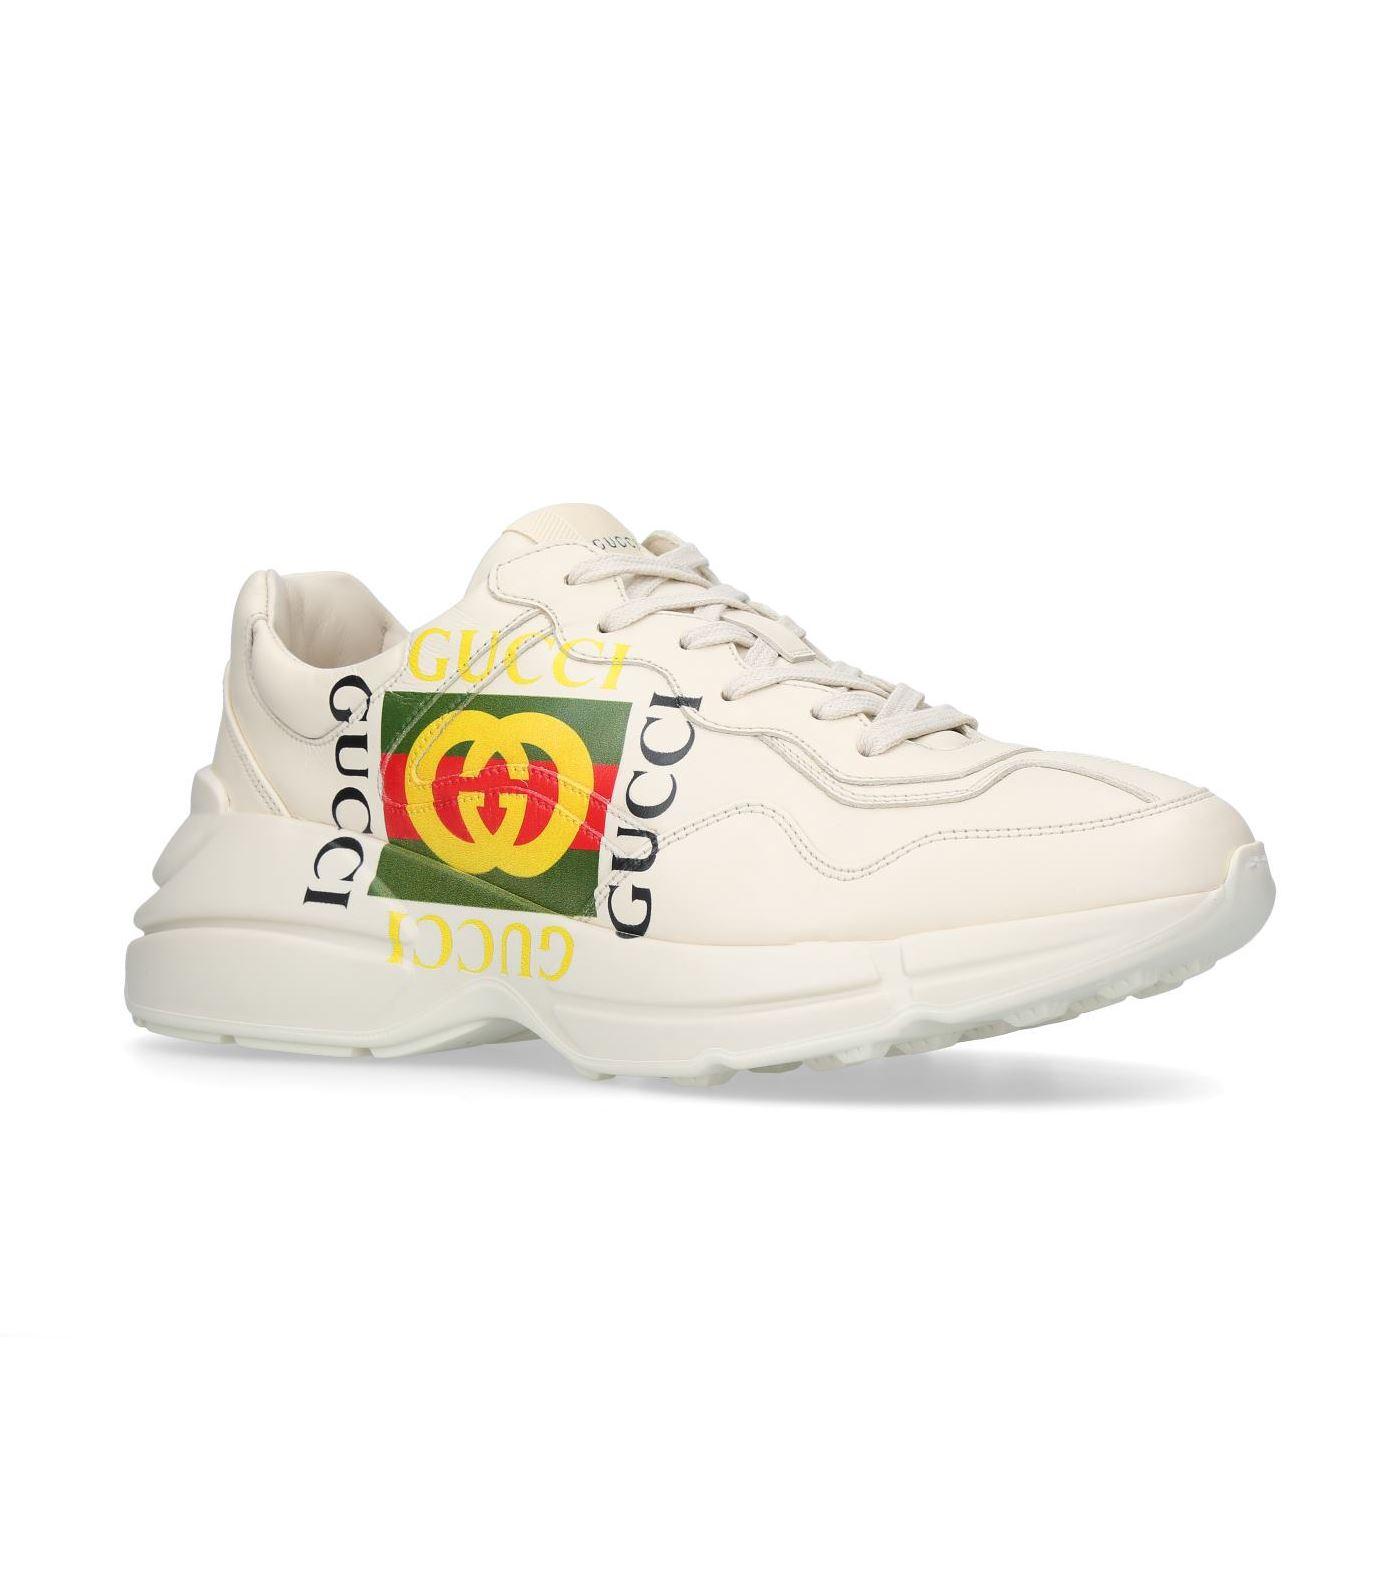 Gucci Leather Rhyton Logo Sneakers in White for Men - Save 21% - Lyst